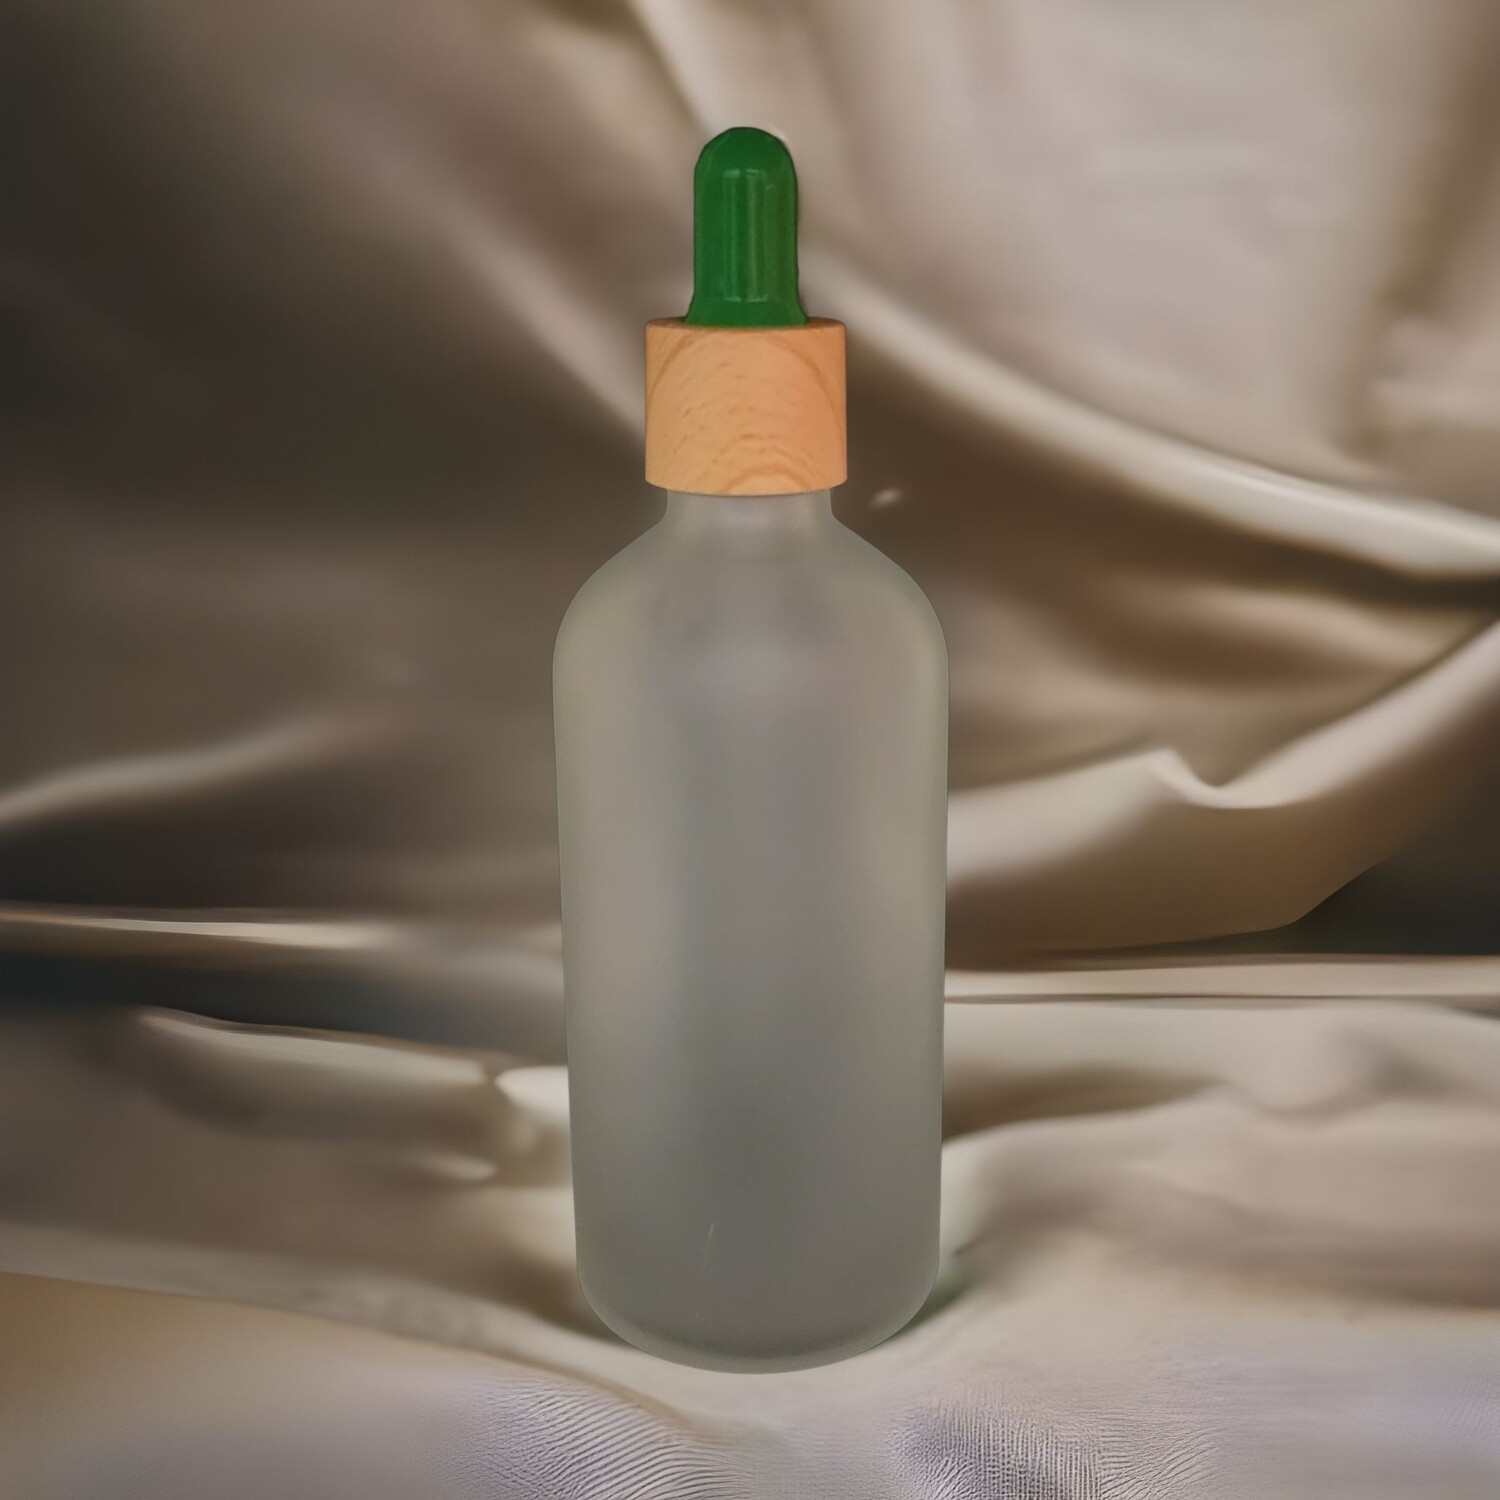 100mL FROSTED CLEAR Glass Dropper Bottle with GREEN Teat & 18mm TIMBER Cap